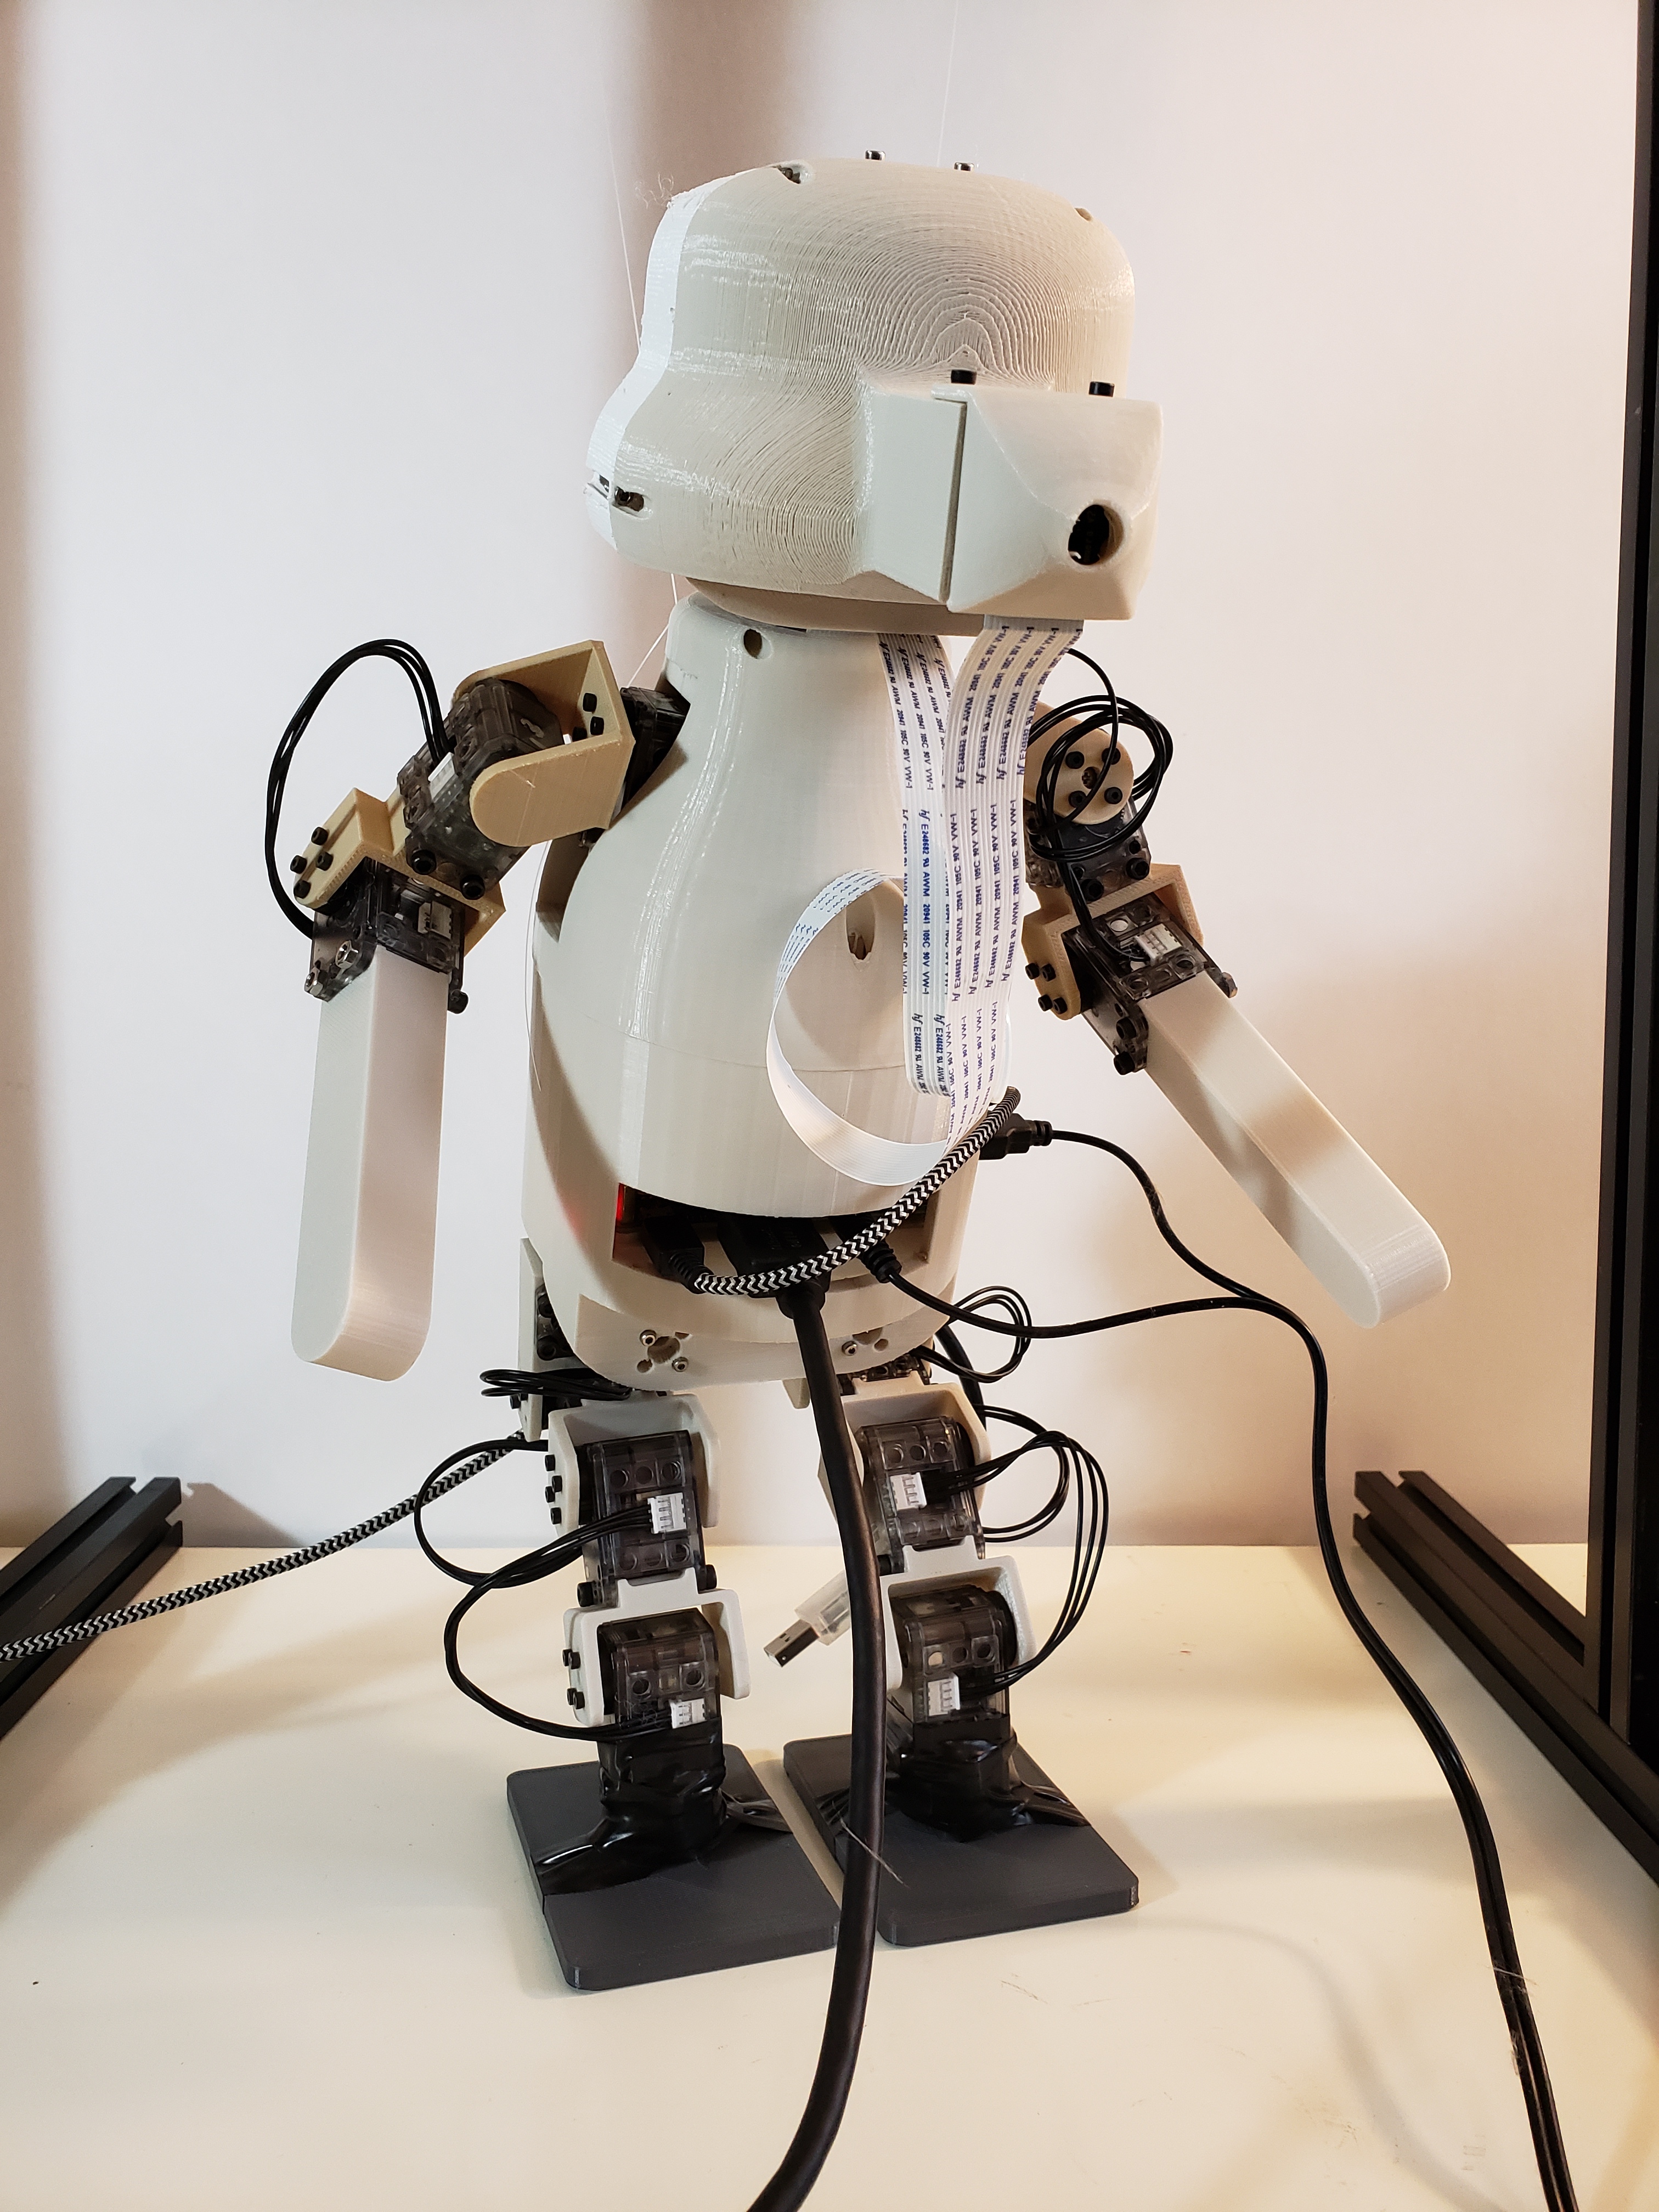 Teddy (A Learning Robot)